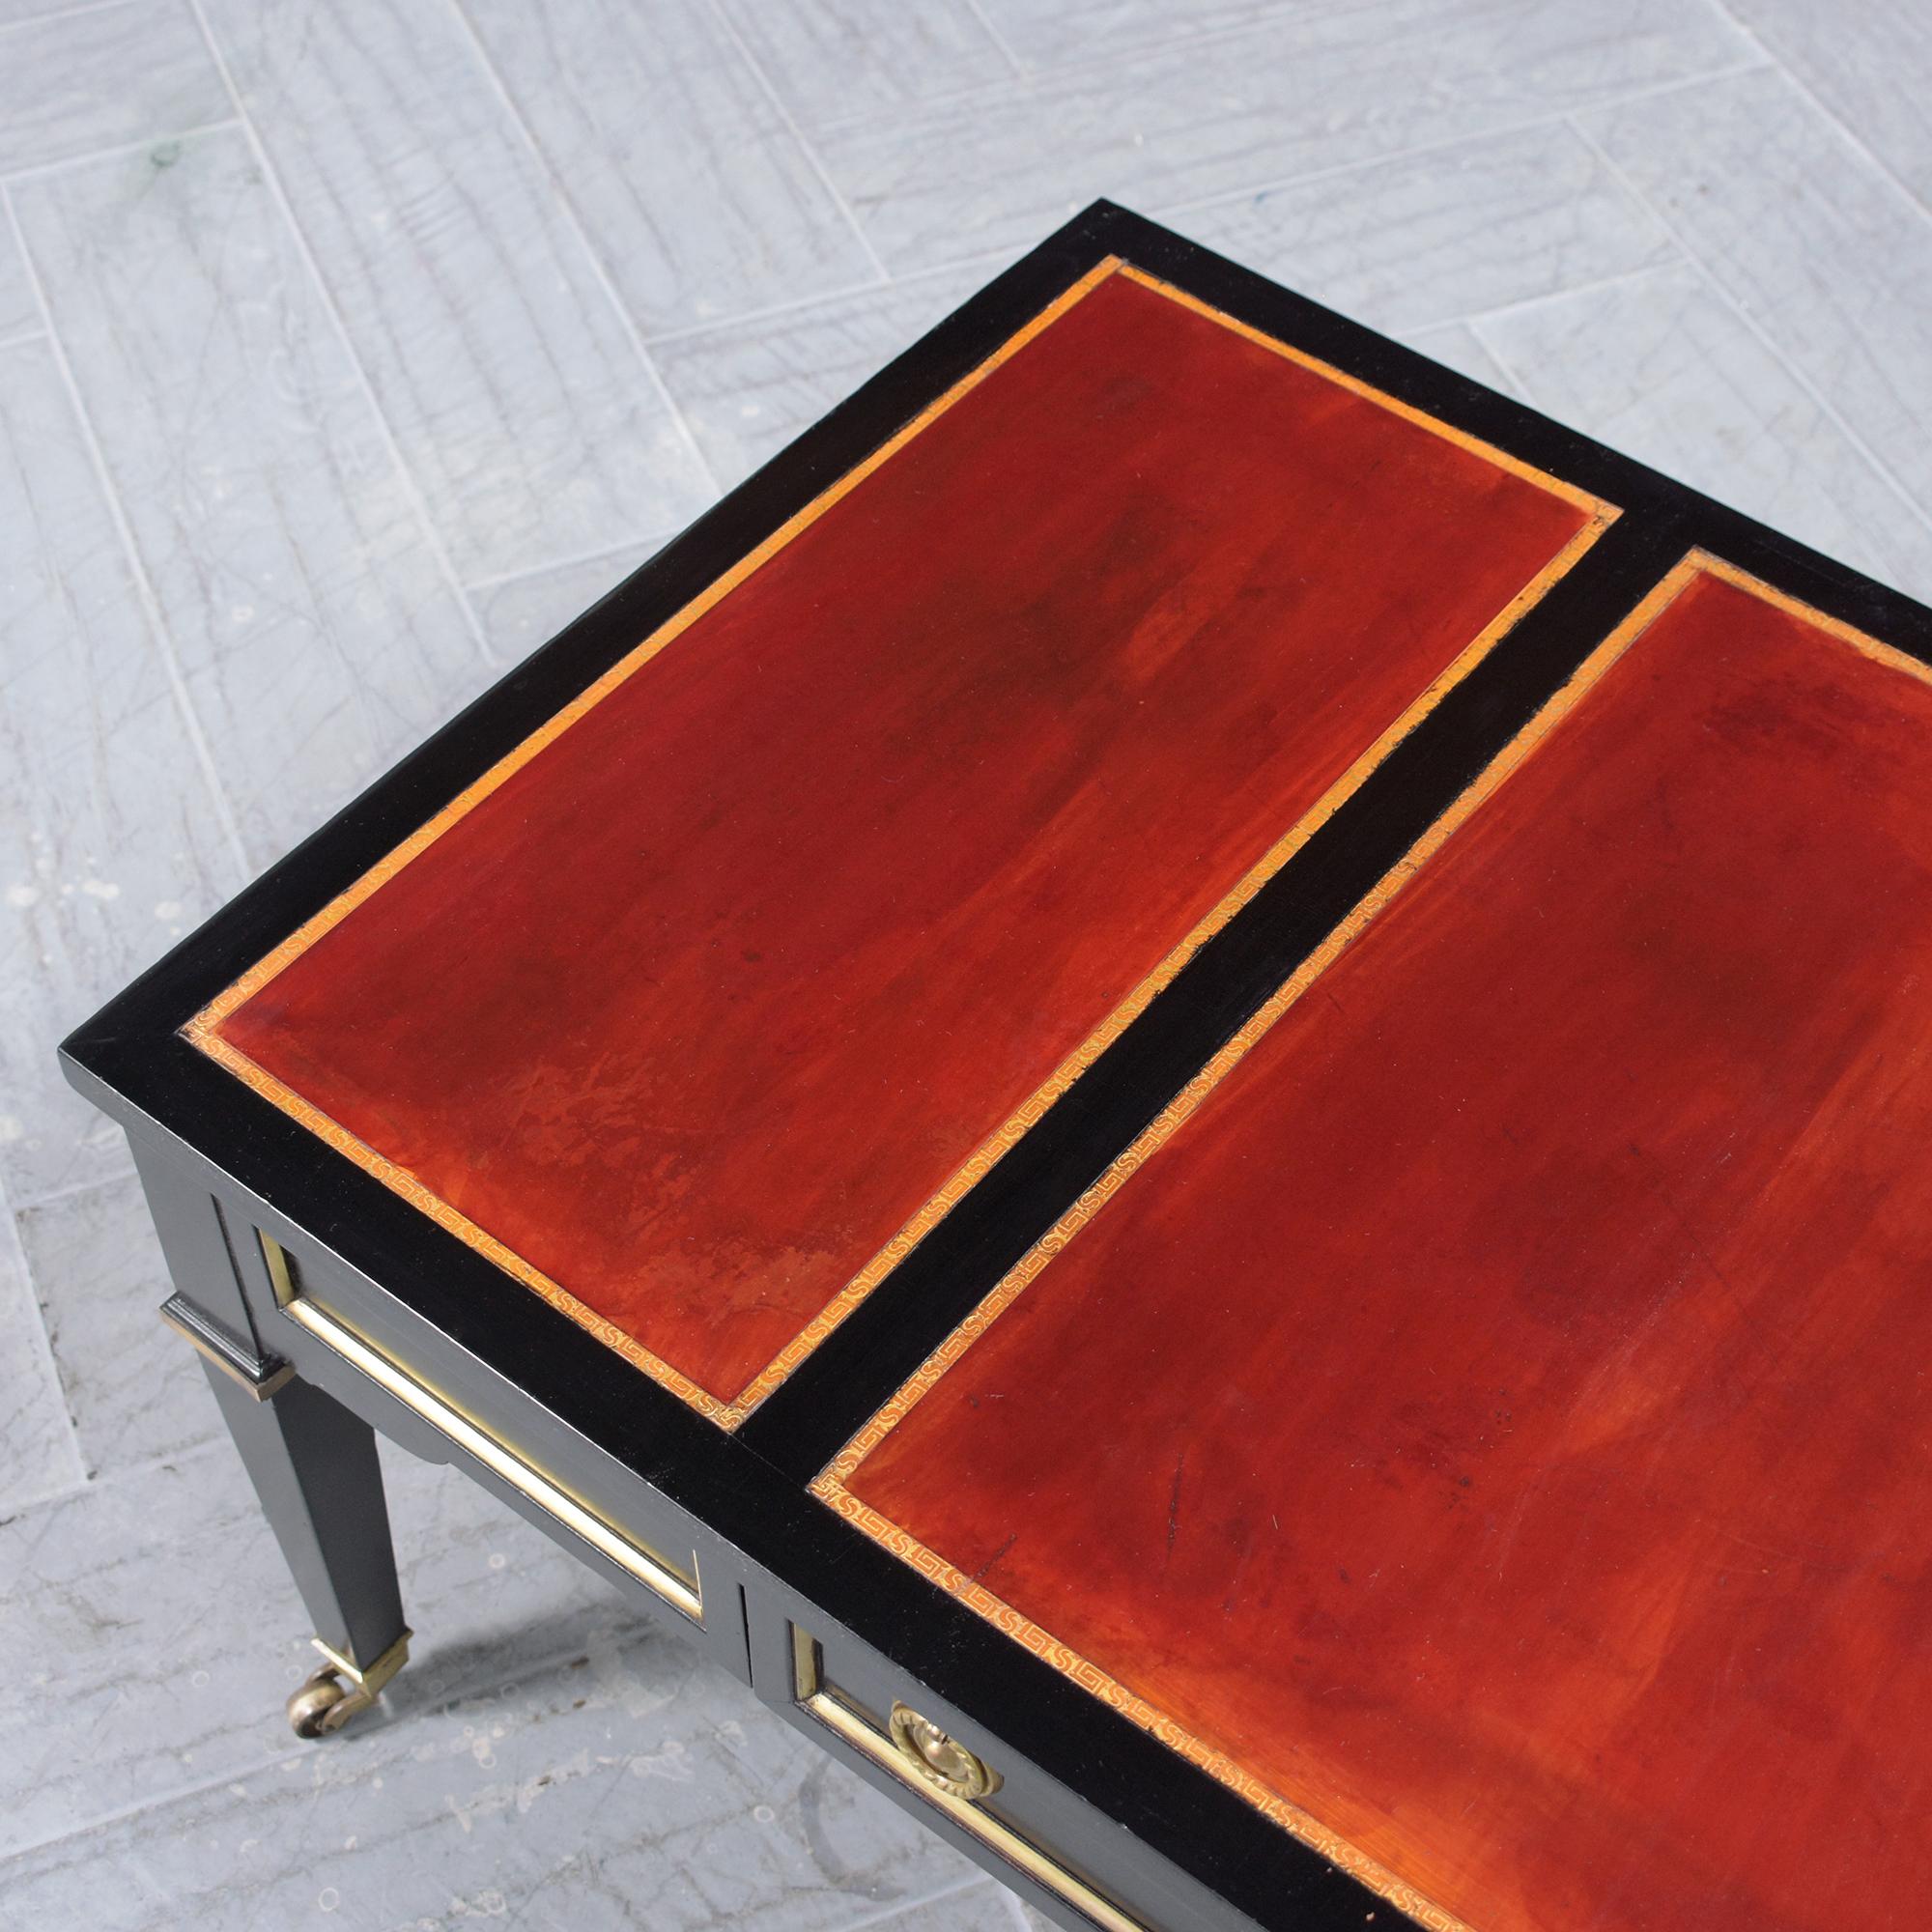 Hollywood Regency-Style Coffee Table by Heritage Henredon: 1960s Luxury For Sale 2